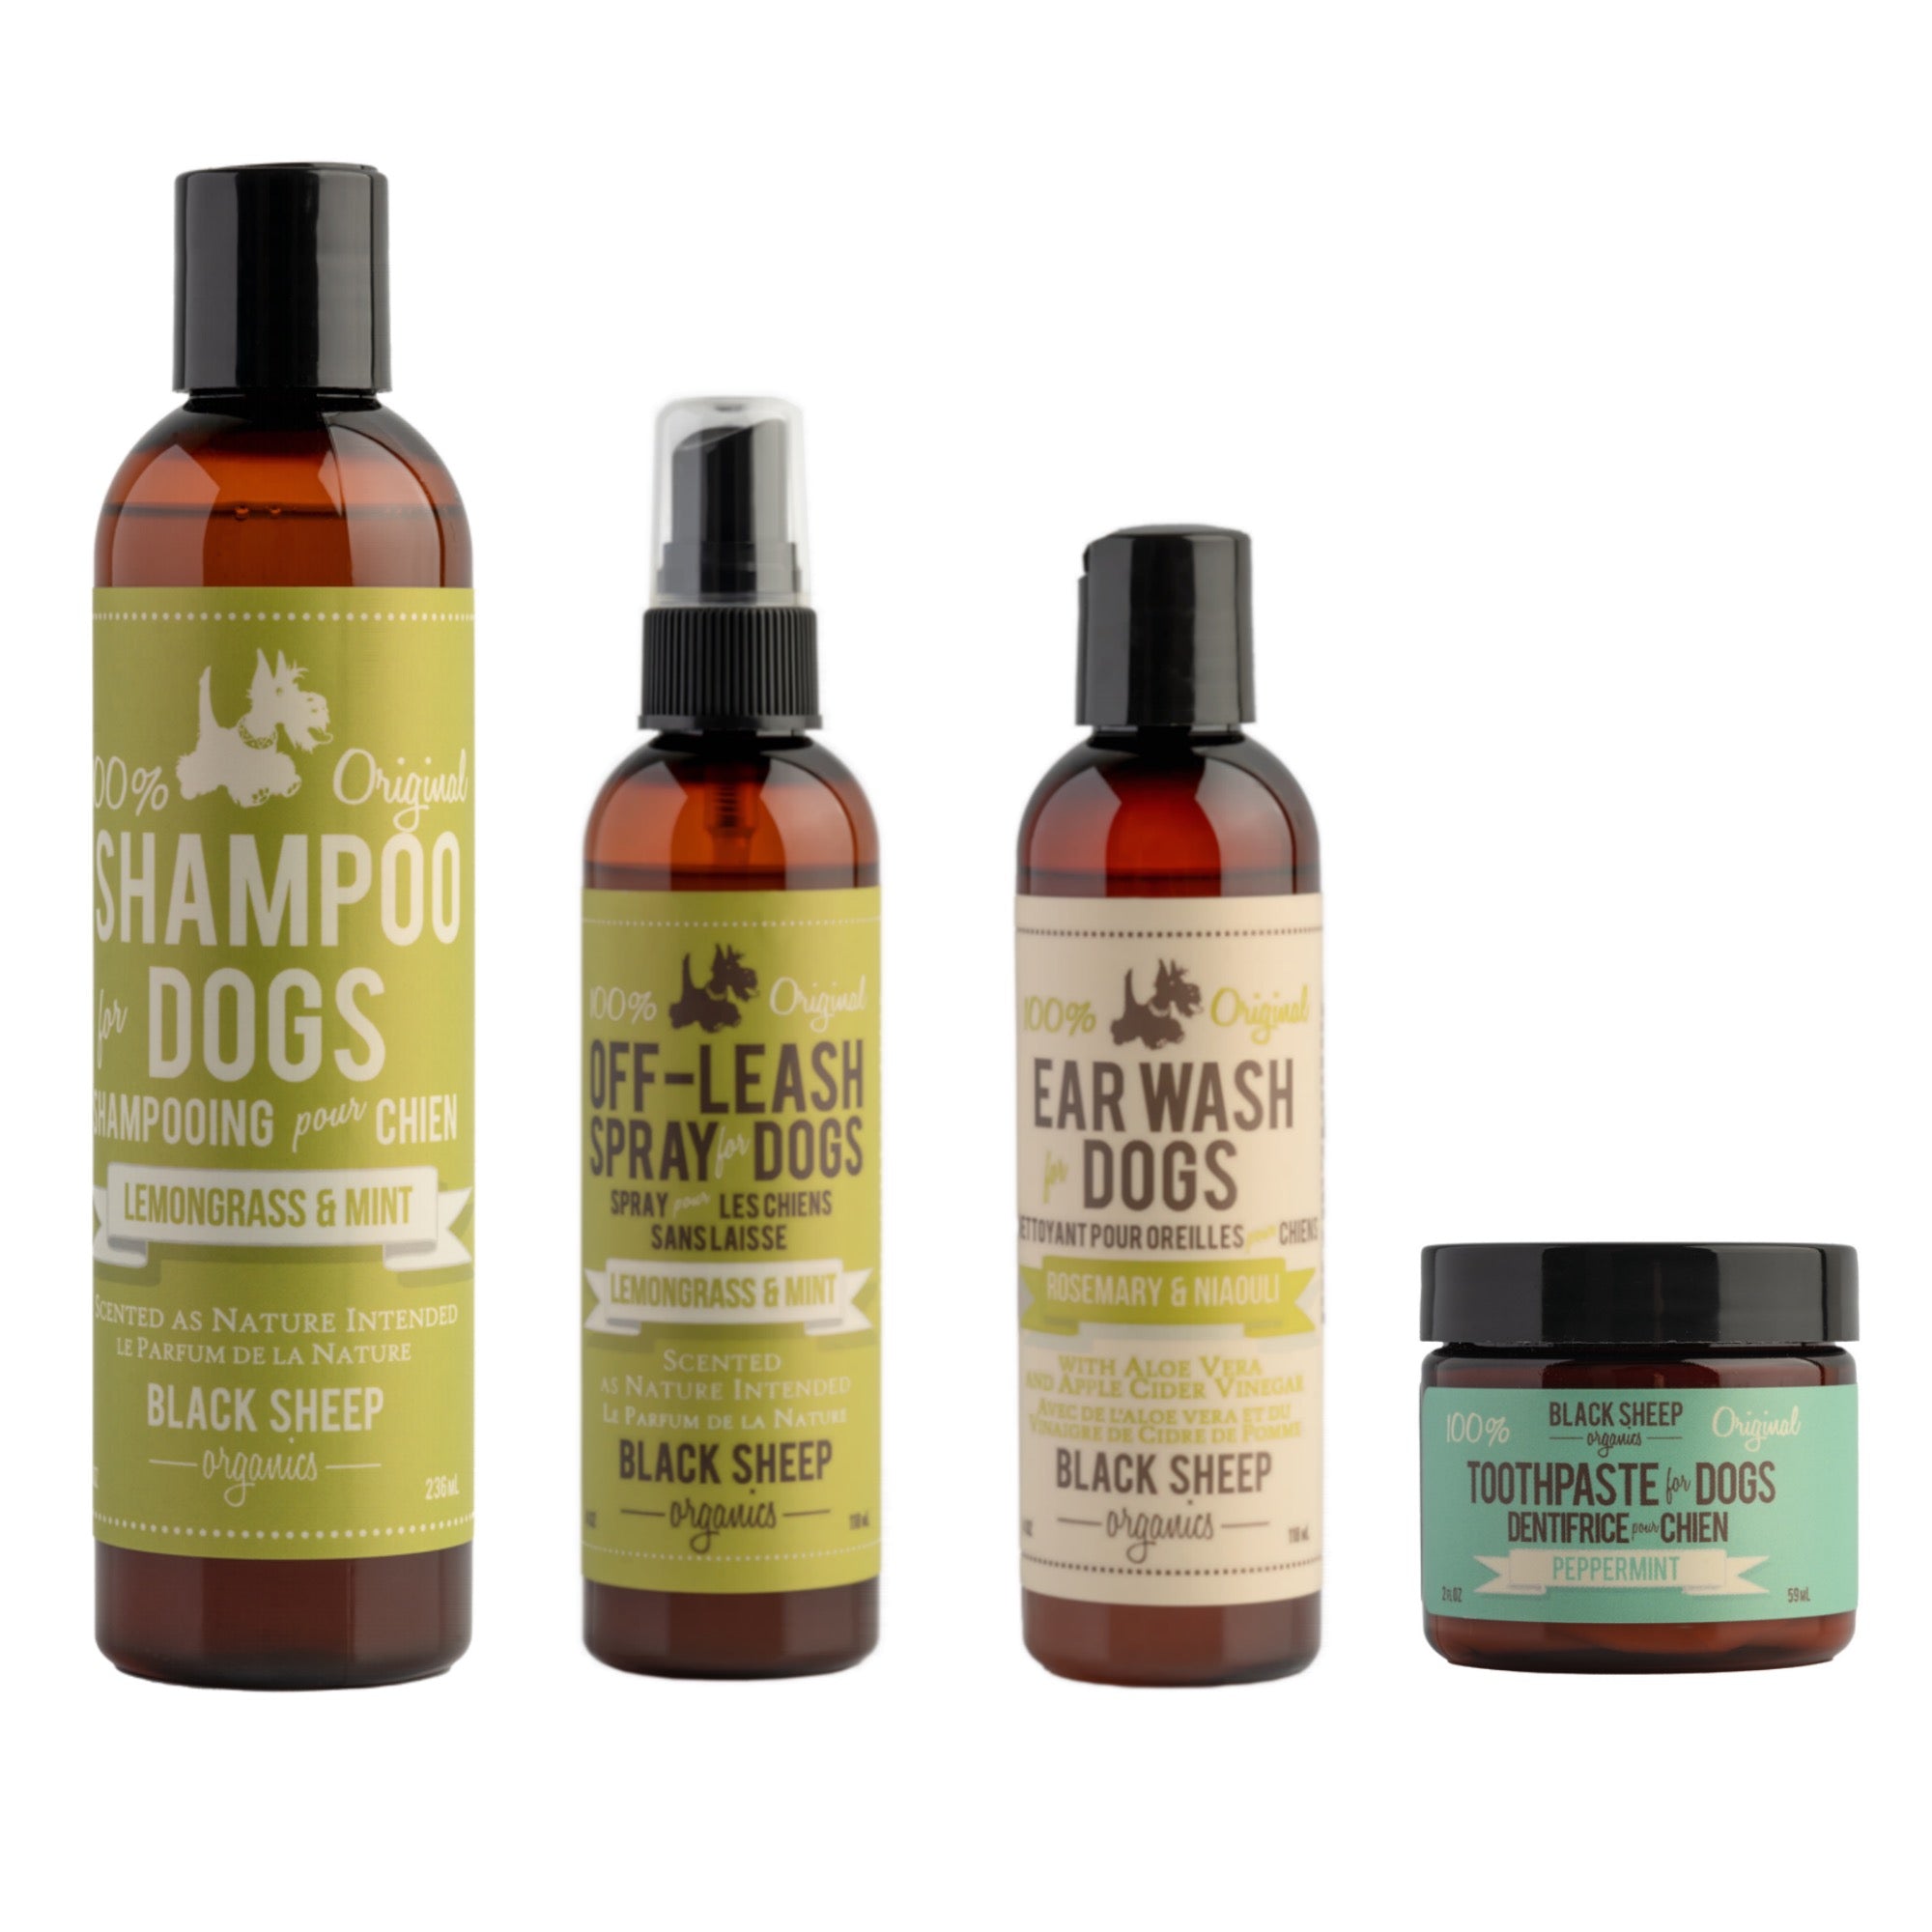 Black sheep organics summer essential for dogs, including lemongrass and mint essential natural dog shampoo, outdoor dog spray, gentle dog ear cleaner and coconut oil for dog toothpaste. All made with certified organic essential oils.